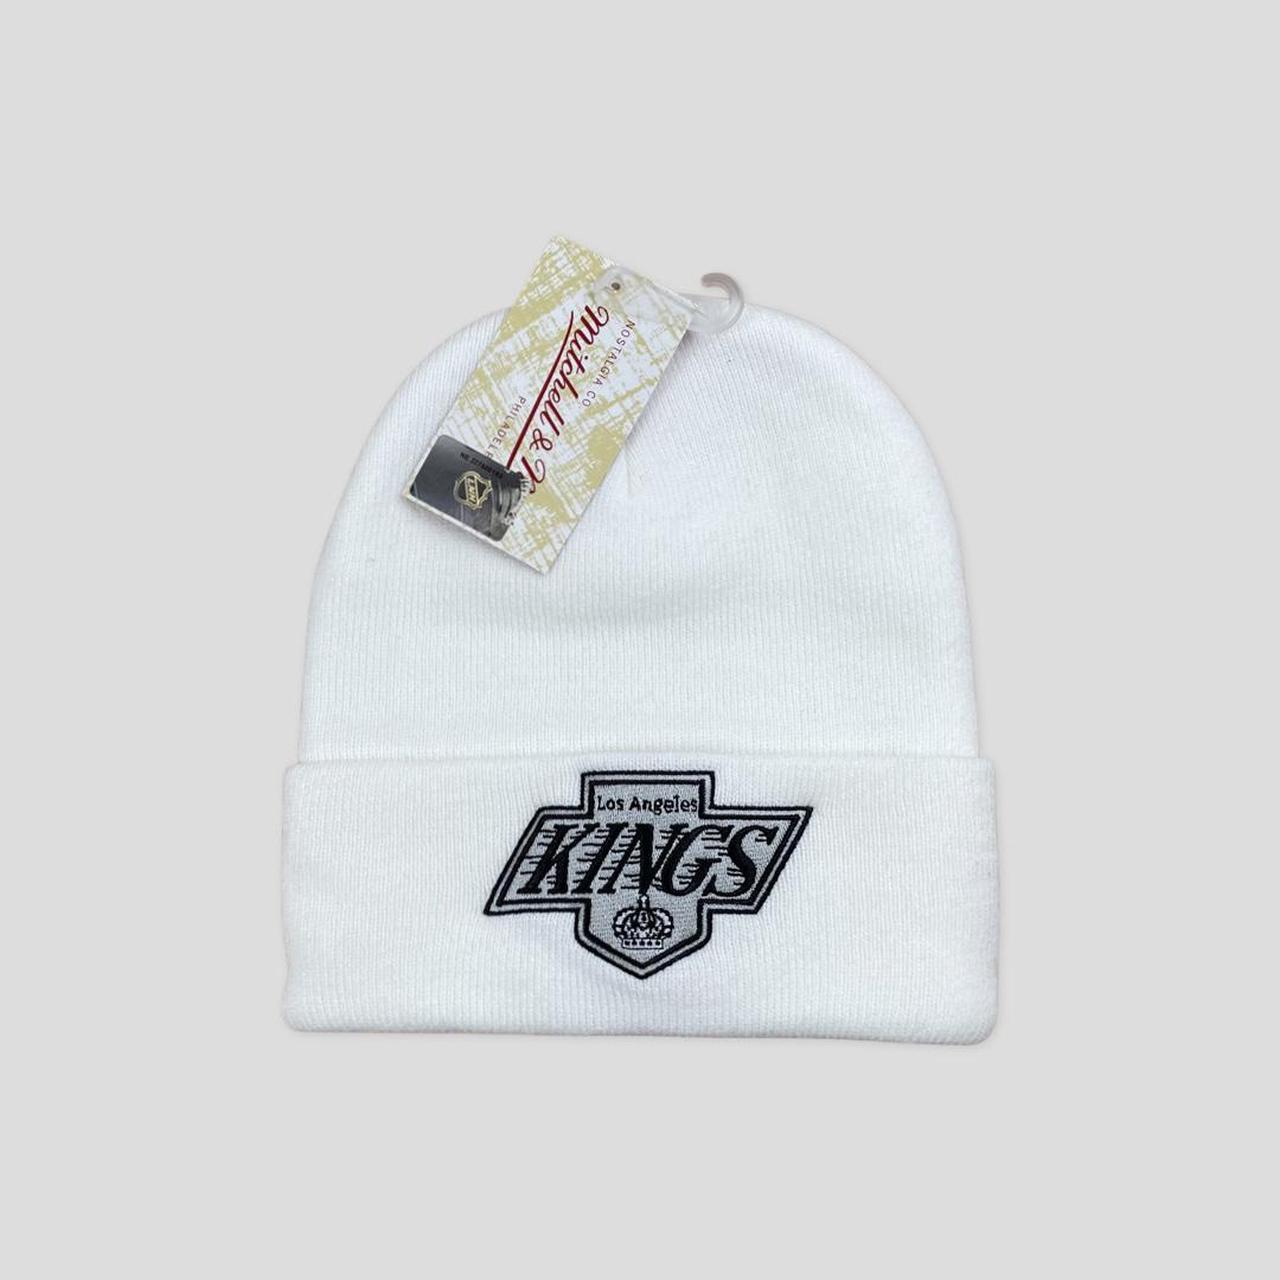 Product Image 1 - Mitchell and ness kings white